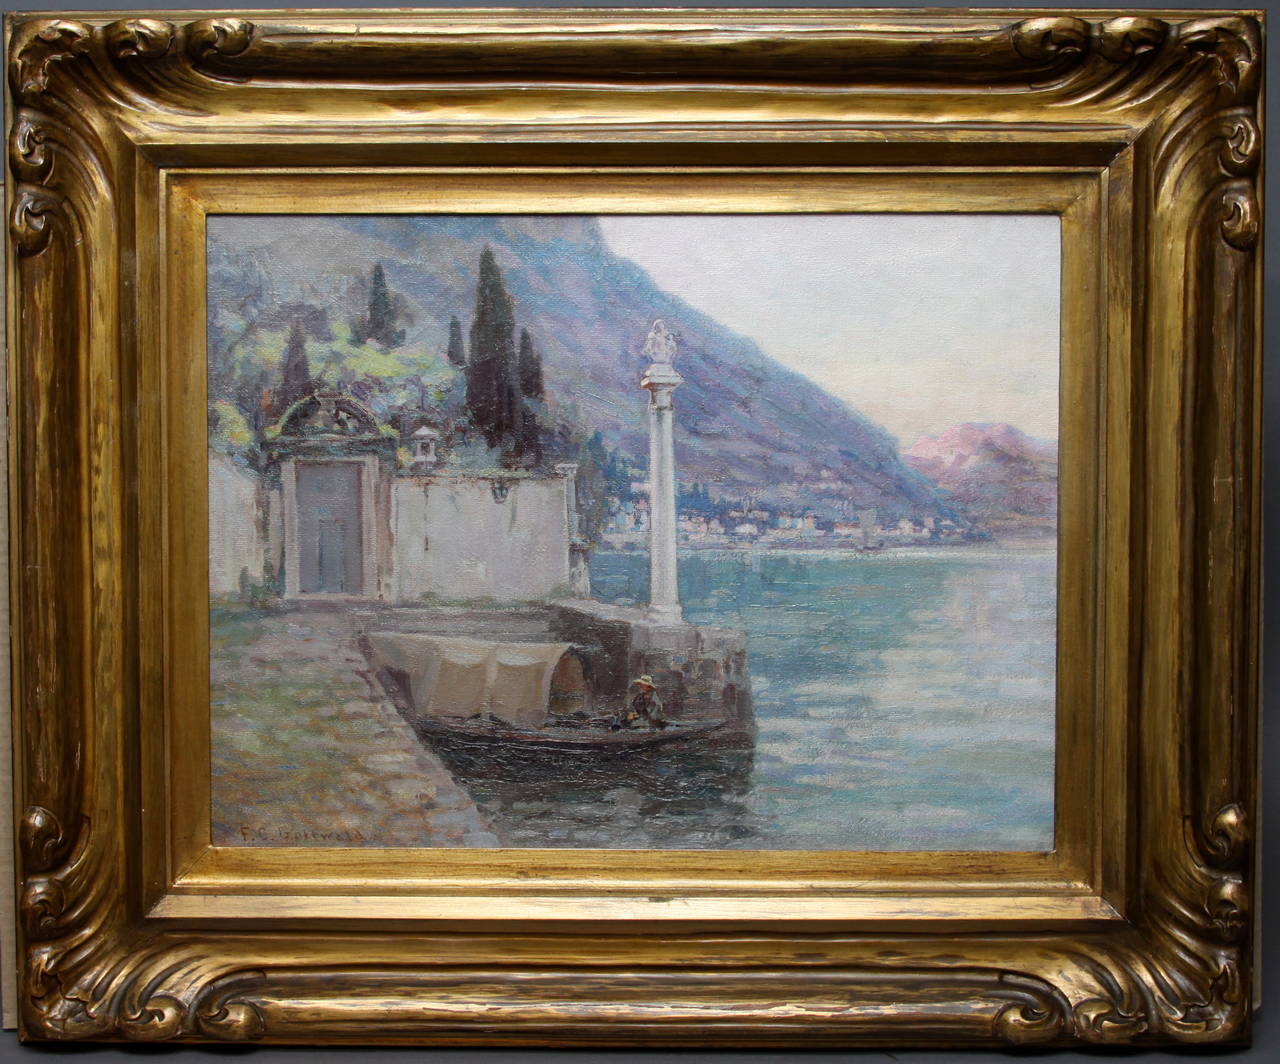 Boat House, Lake Como - Painting by Frederick Carl Gottwald